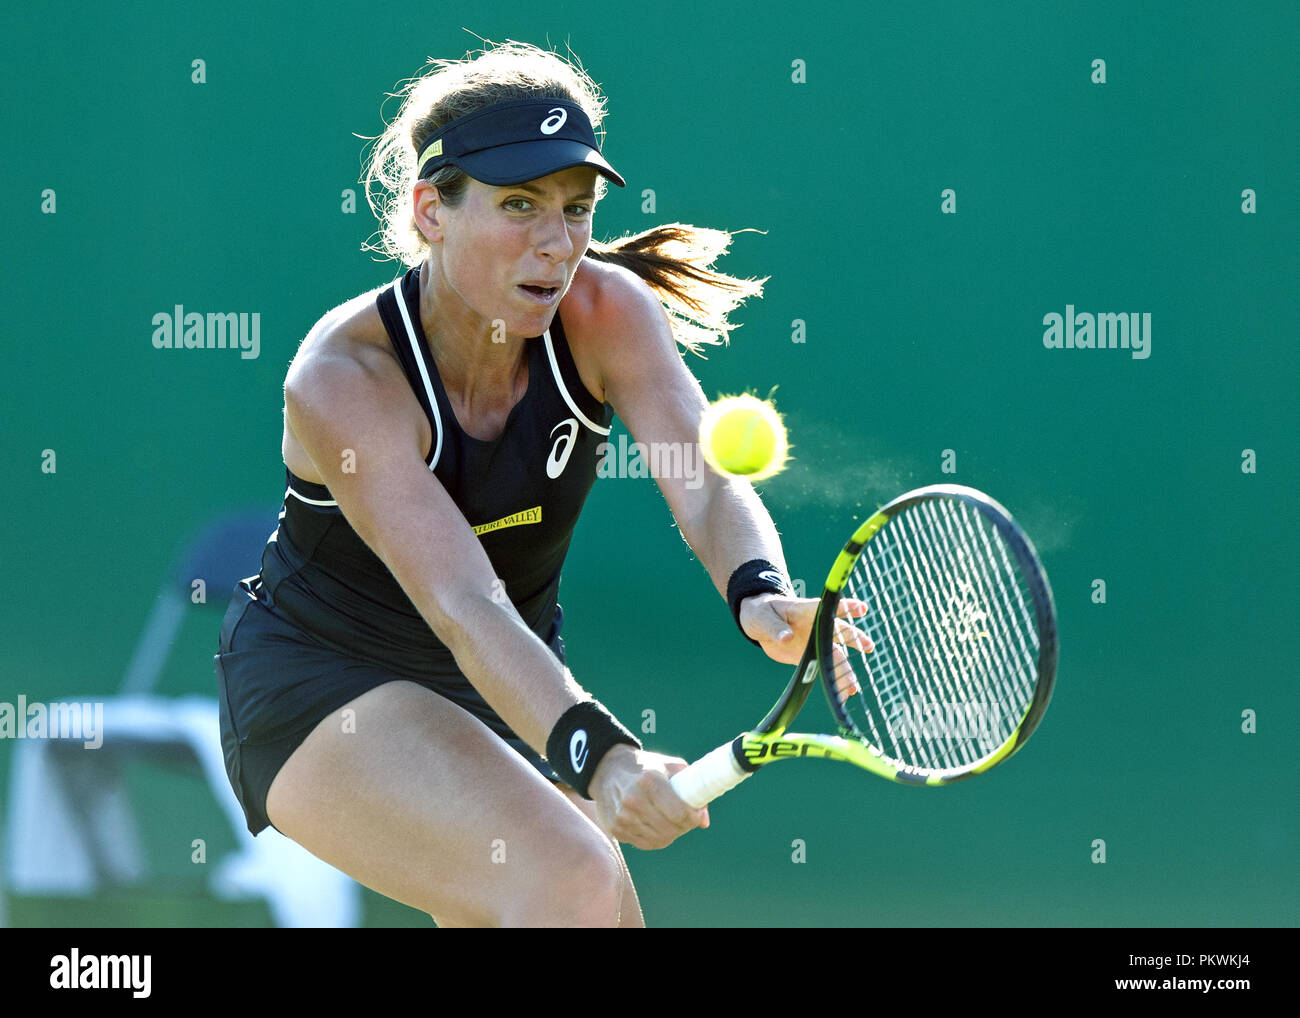 Johanna Konta (a.k.a. Jo Konta), professional tennis player representing the United Kingdom, plays a shot during a singles match in 2018. Stock Photo